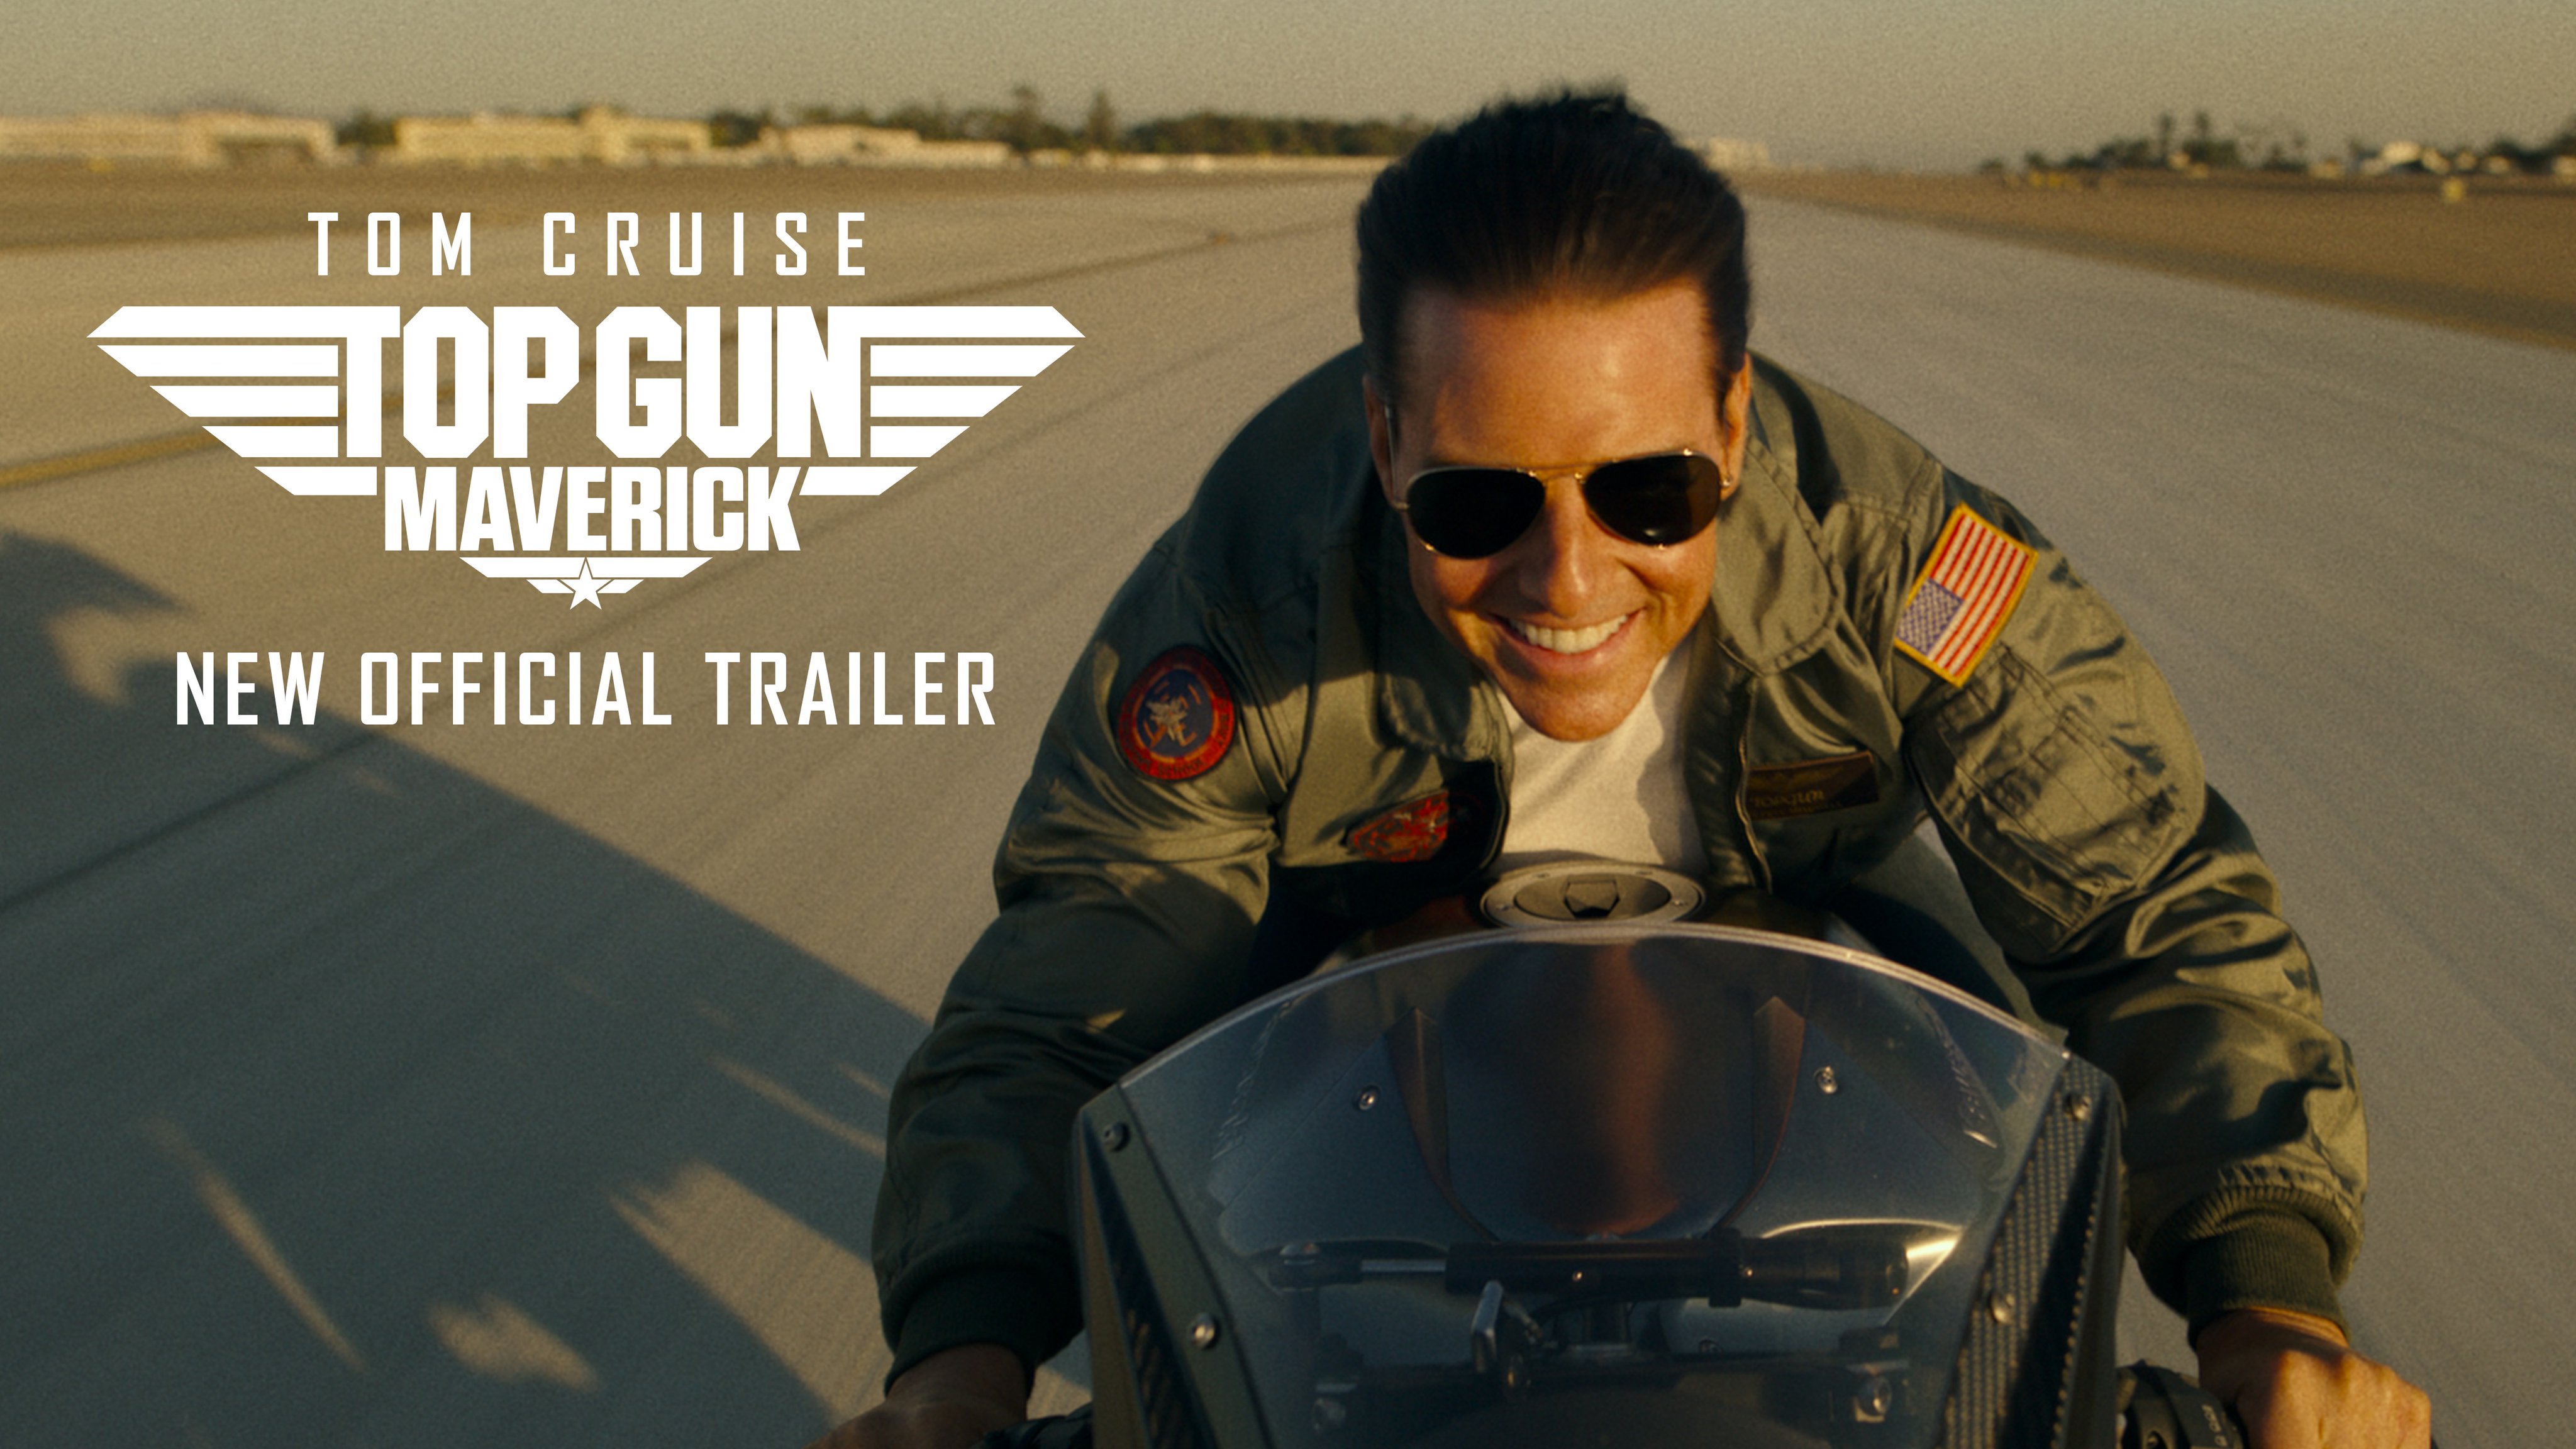 Tom Cruise new trailer for #TopGun is here. See you at the theater